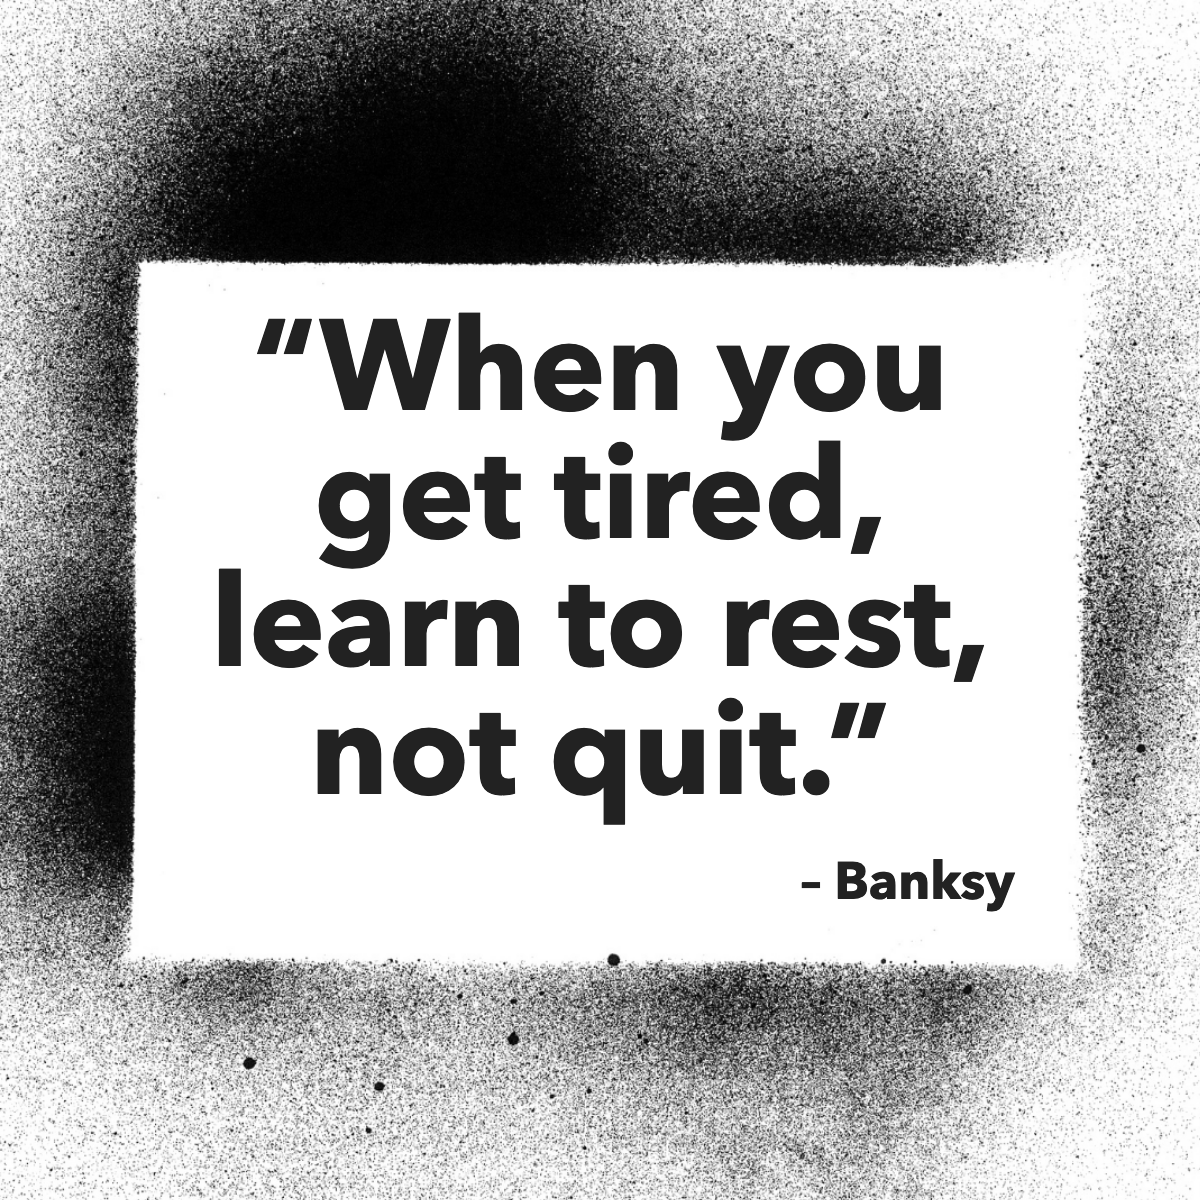 Don't feel guilty if you ever get tired, take your time ... 😉

#motivationnation #motivationalquotesdaily #quoteoftheday #quoteofday #quotedaily

 #exprealty #realestatestyle #nycityworld #stunningnjhomes #nyctrip #realestatetrends #nyc #nycexplorers #nycstyle